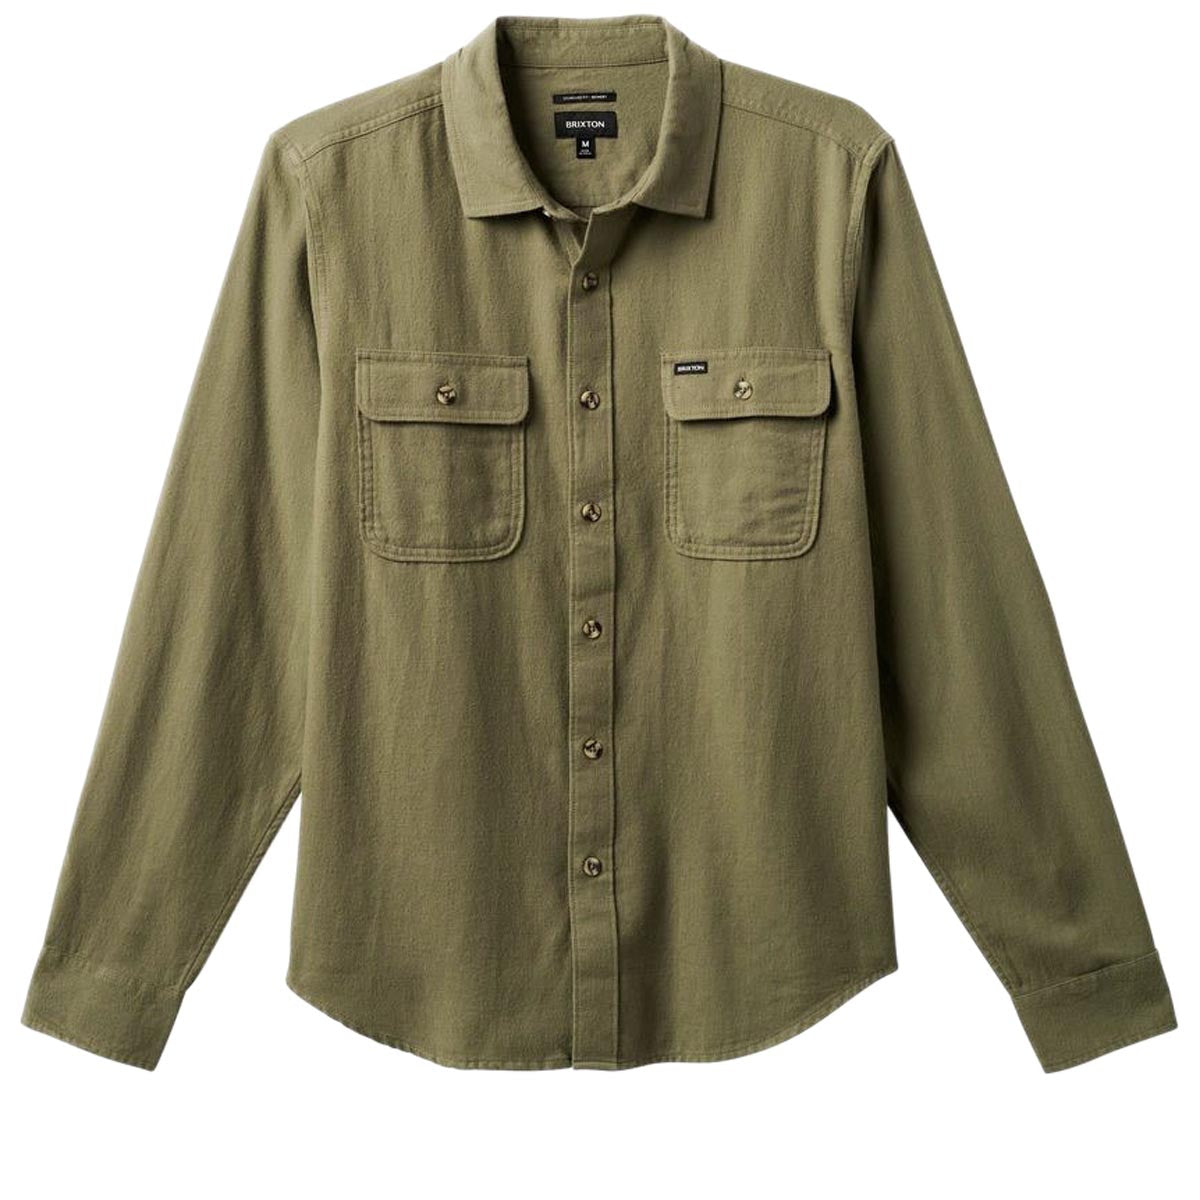 Brixton Bowery Lw Ultra Flannel Shirt - Olive Surplus image 2